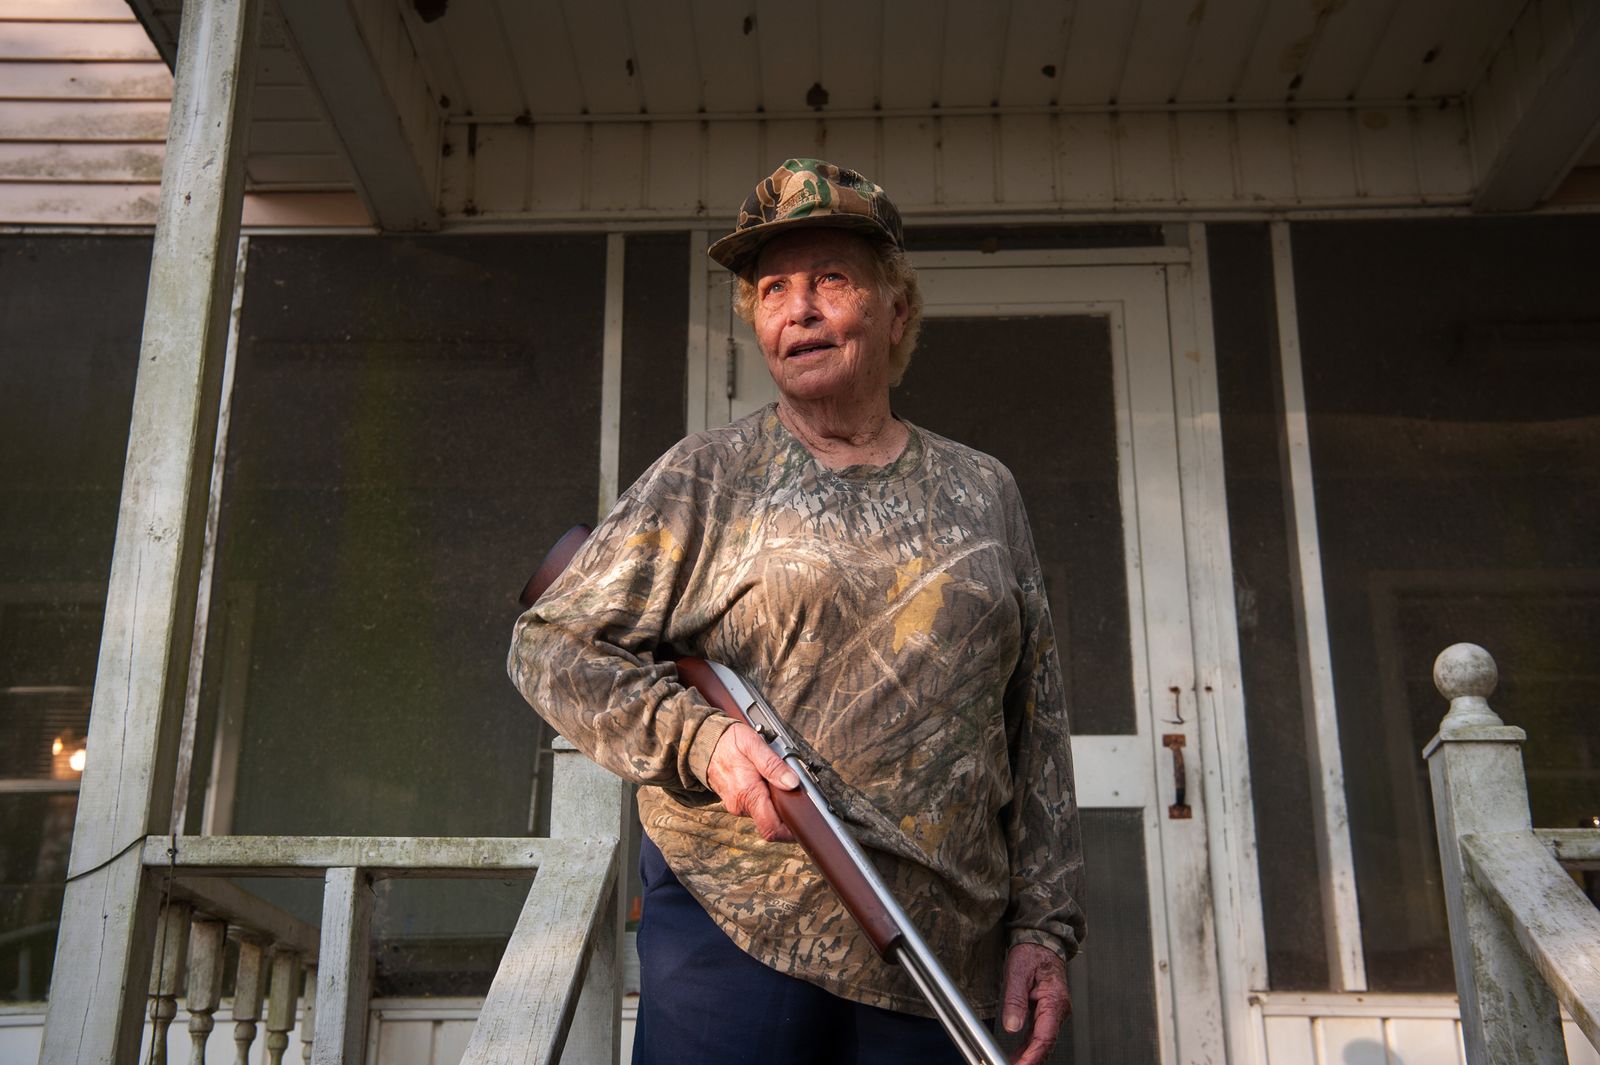 © Rory Doyle - Squirrel hunter Annie Mendoza, 85, poses for a portrait outside her hunting cabin in Bayou Sorrel, Louisiana, USA.